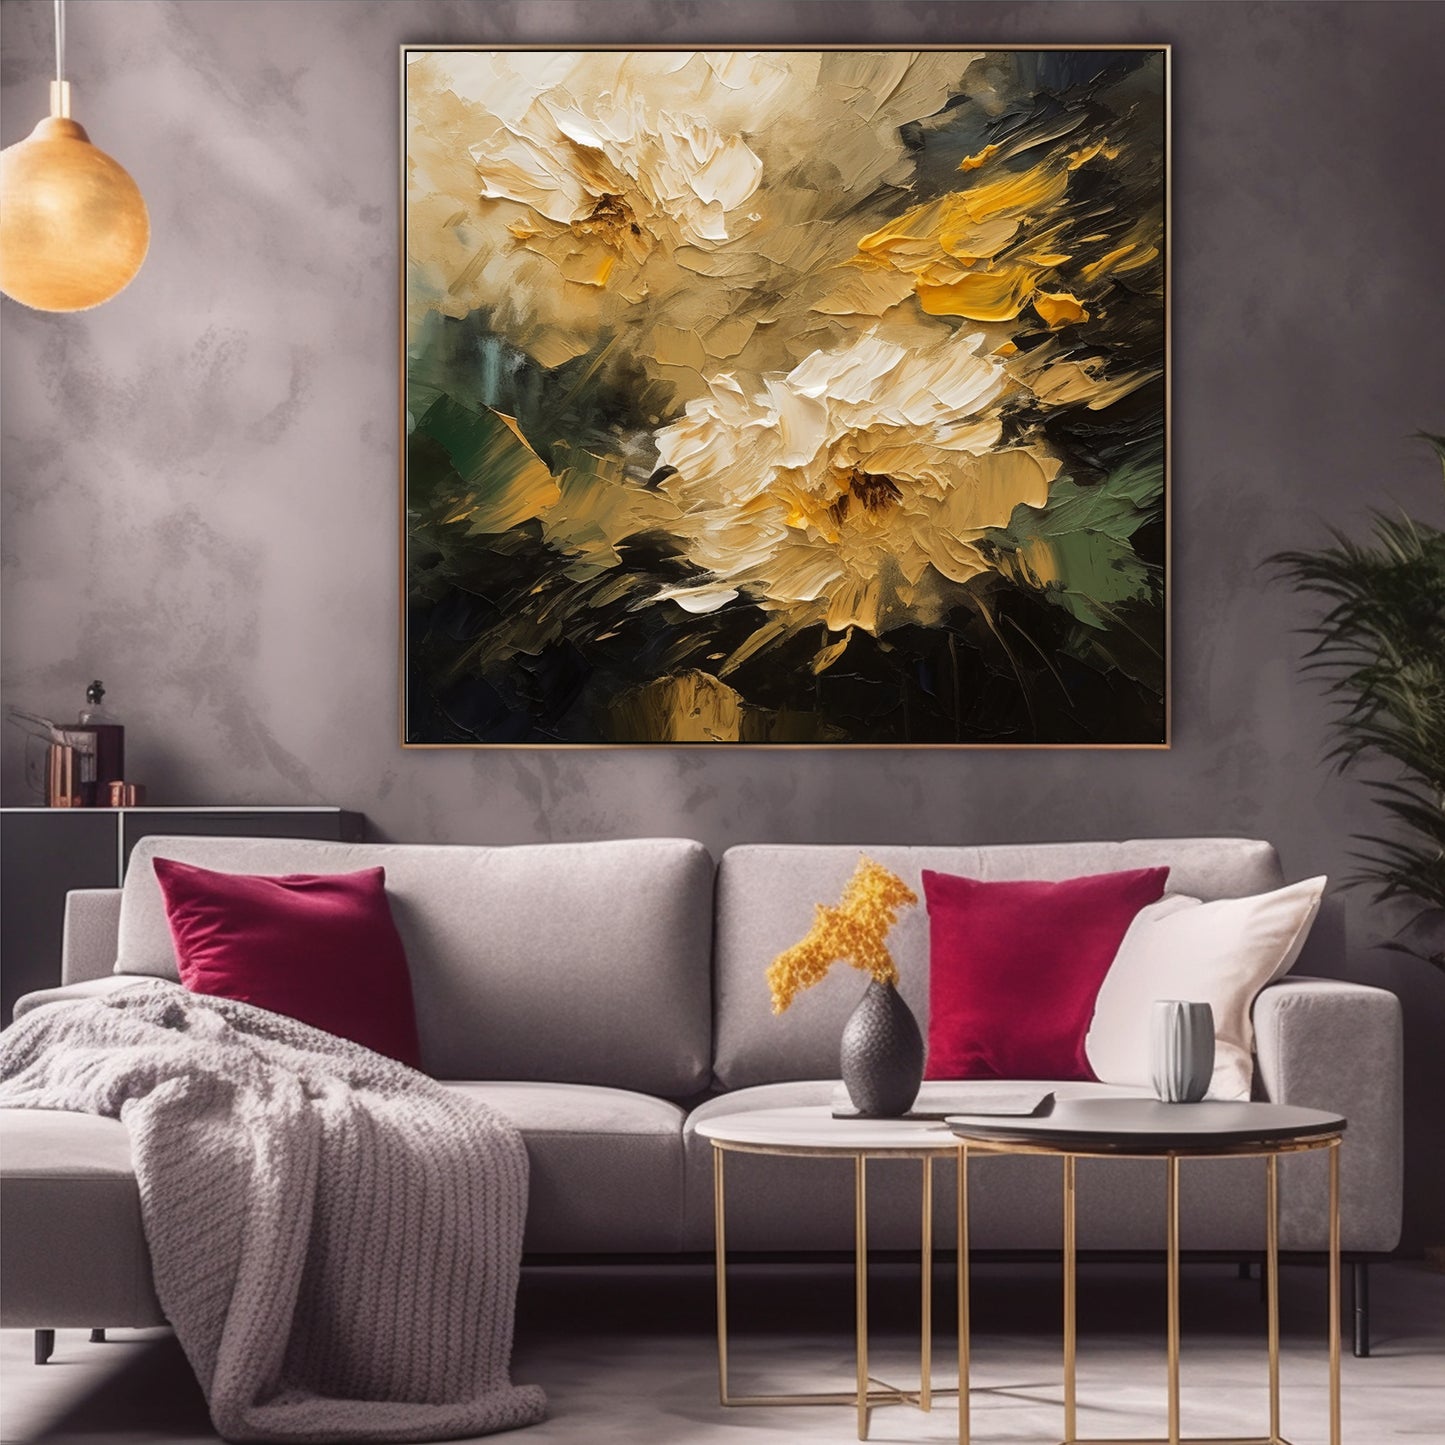 Texture Wall Decor Home Decor Gift Abstract Floral Painting  F0416BRT2334